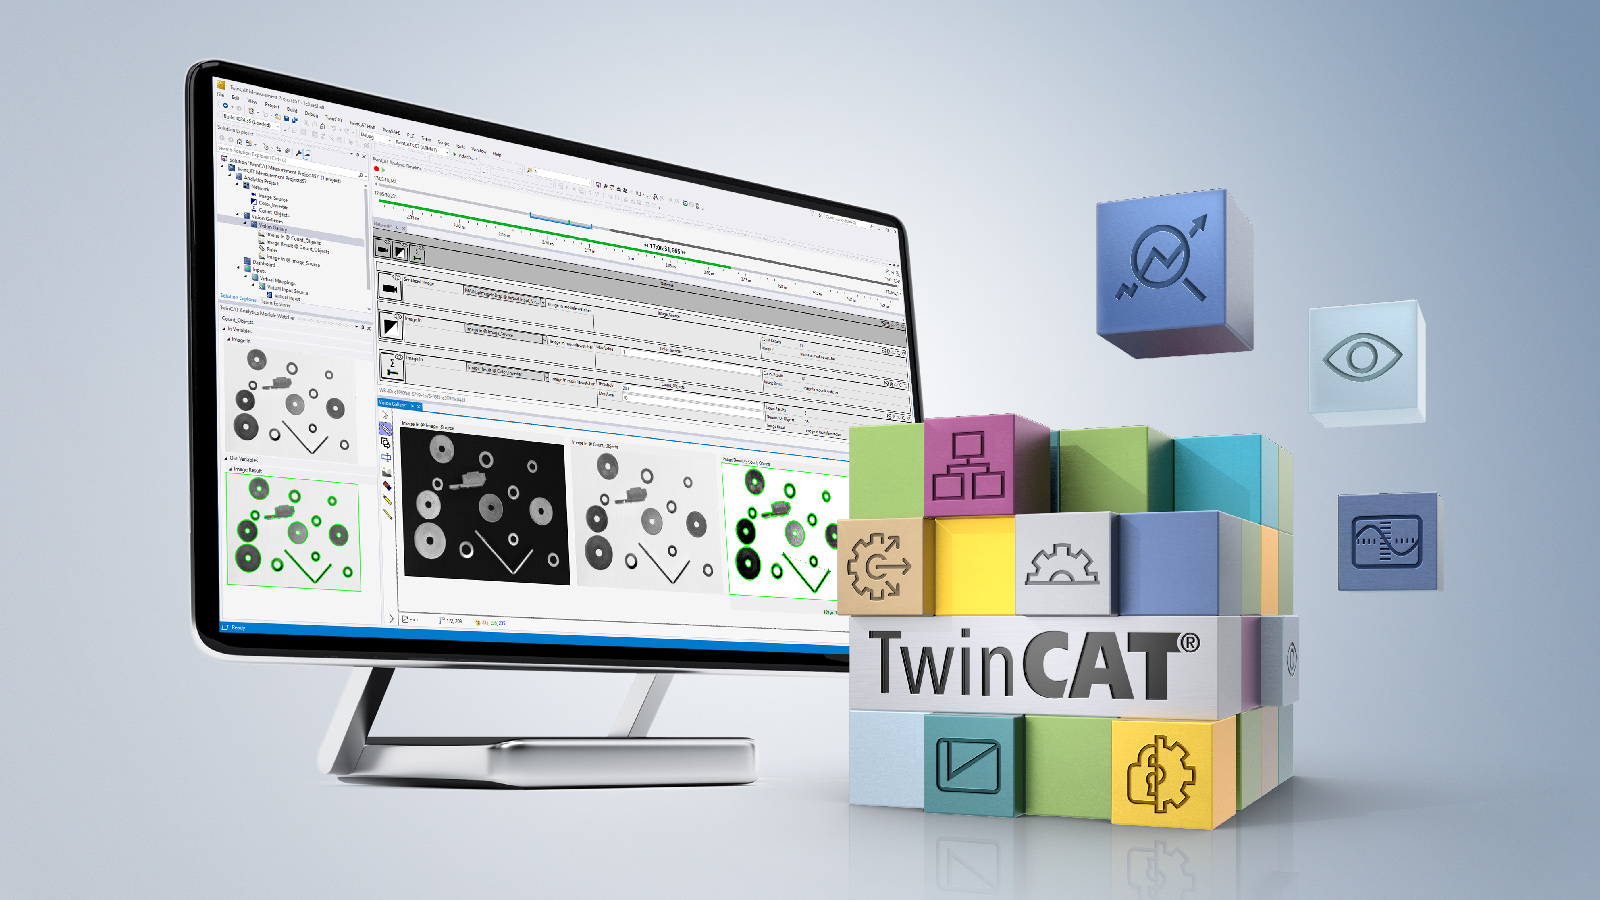 With the extension of TwinCAT Analytics, images can now also be conveniently and comprehensively evaluated with the TwinCAT Vision functions in the engineering environment.